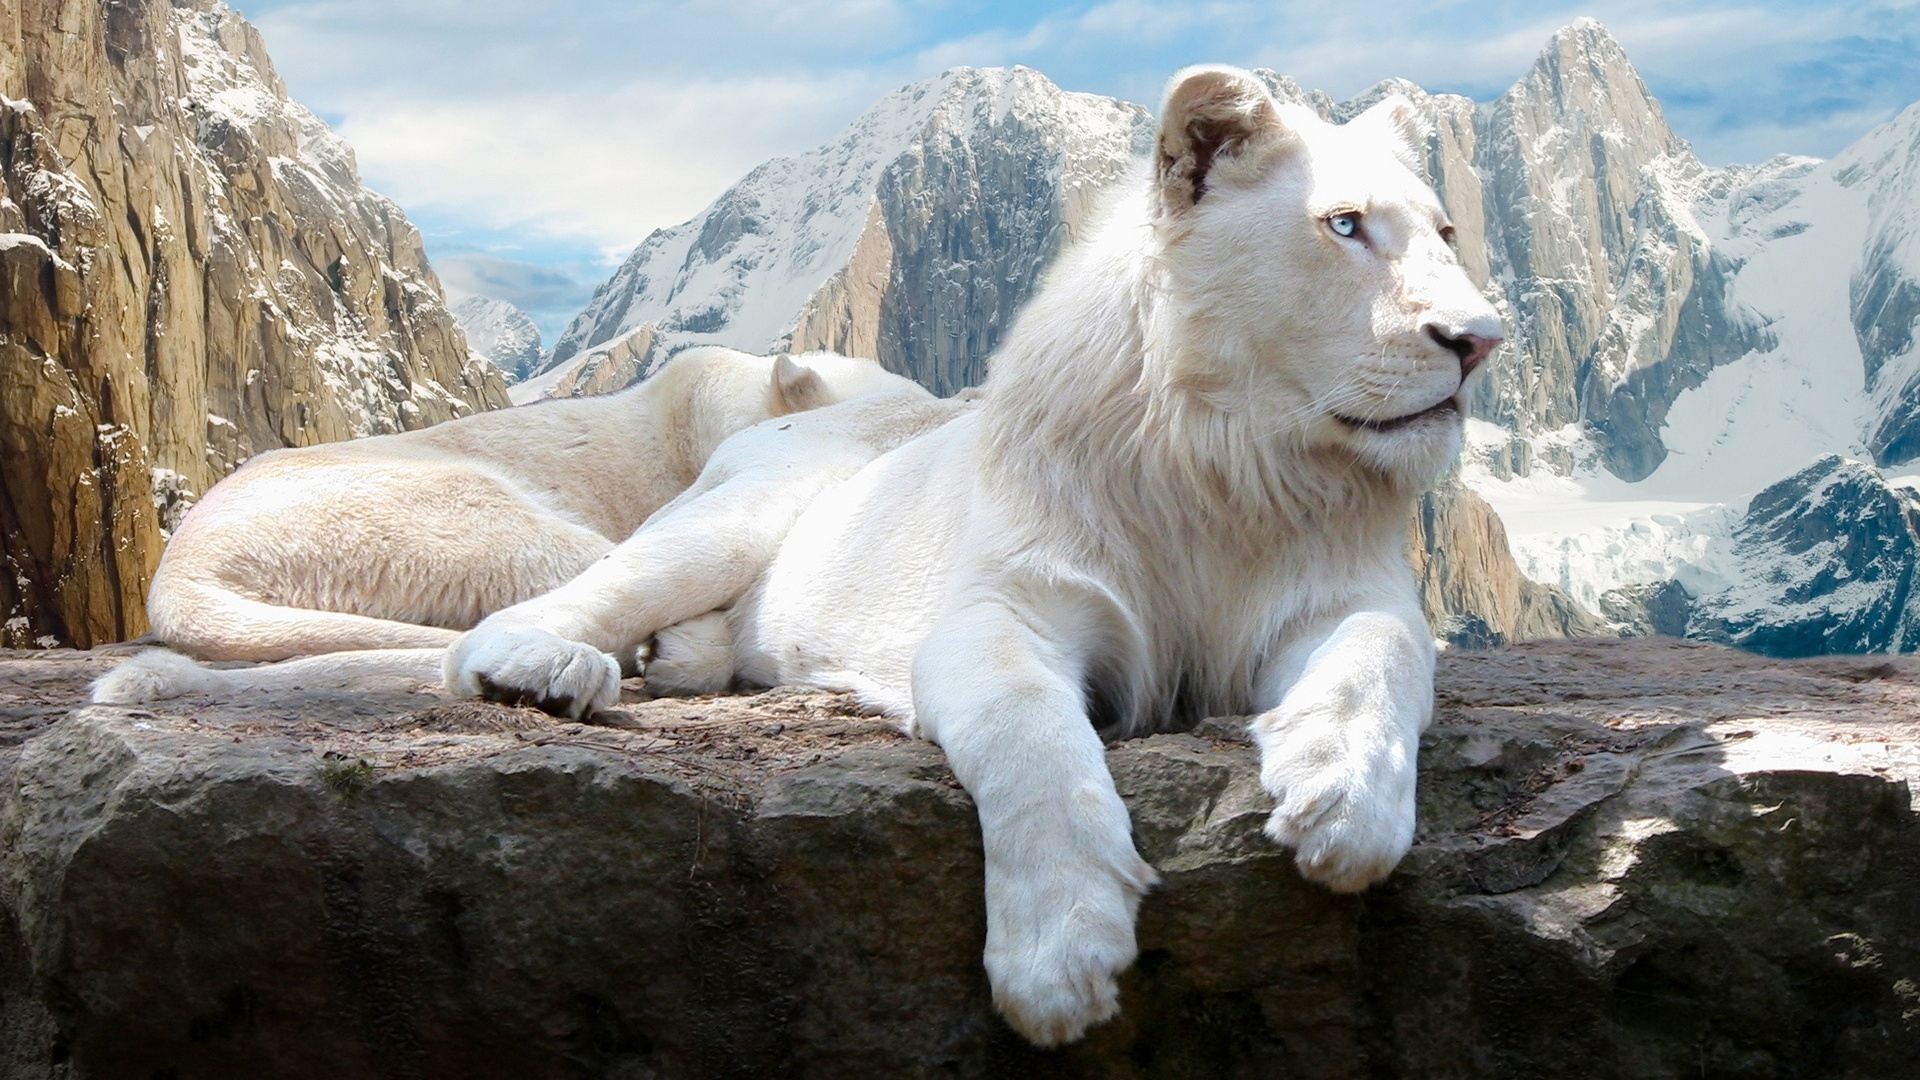 White Lions for 1920 x 1080 HDTV 1080p resolution